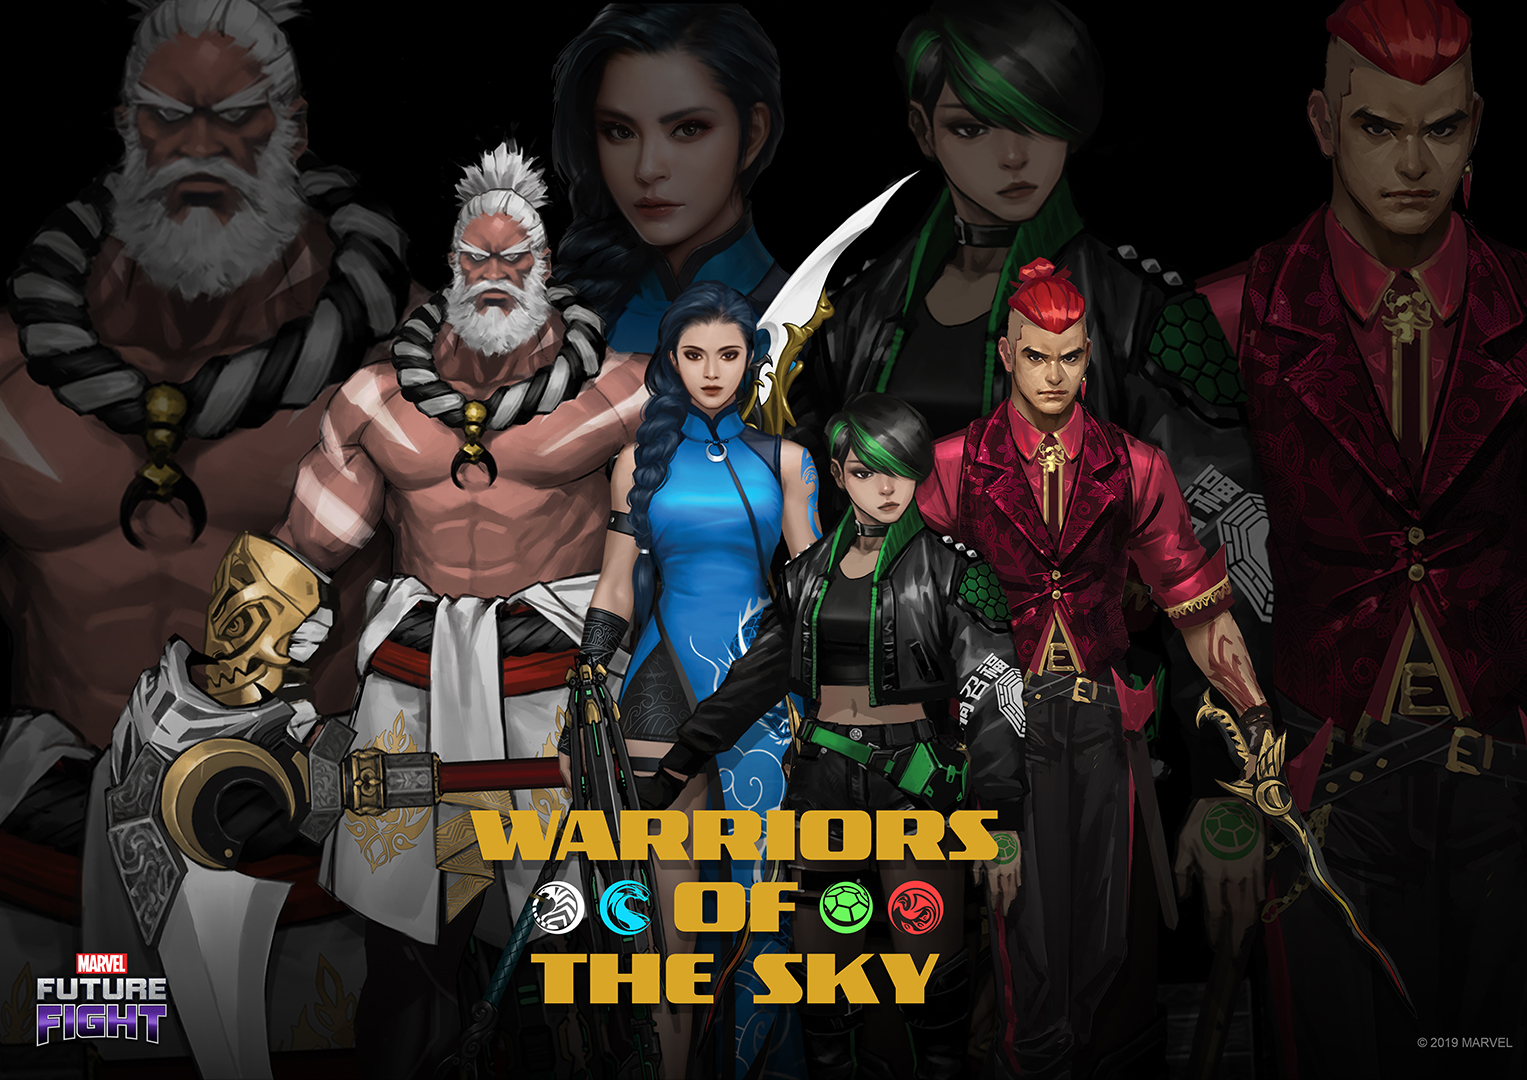 Netmarble reveals all-new original Marvel super hero team ‘Warriors Of The Sky’ exclusively for Marvel Future Fight